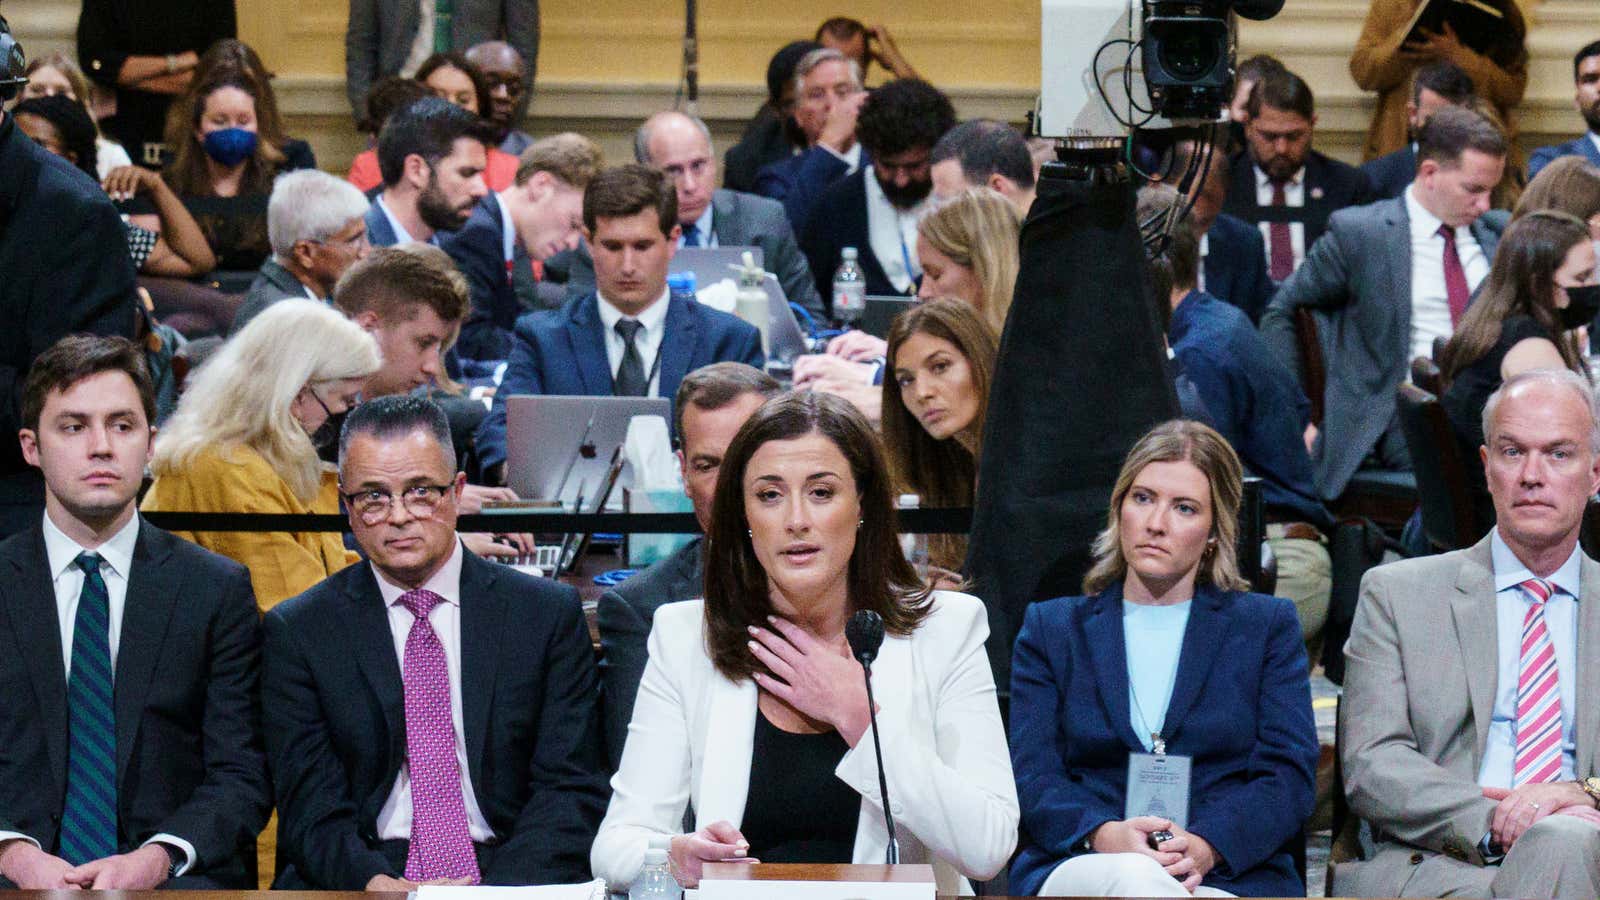 Cassidy Hutchinson, who was an aide to former White House Chief of Staff Mark Meadows during the administration of former U.S. President Donald Trump, testifies during a public hearing of the U.S. House Select Committee investigating the January 6 Attack on the U.S. Capitol, at the Capitol, in Washington, U.S., June 28, 2022.